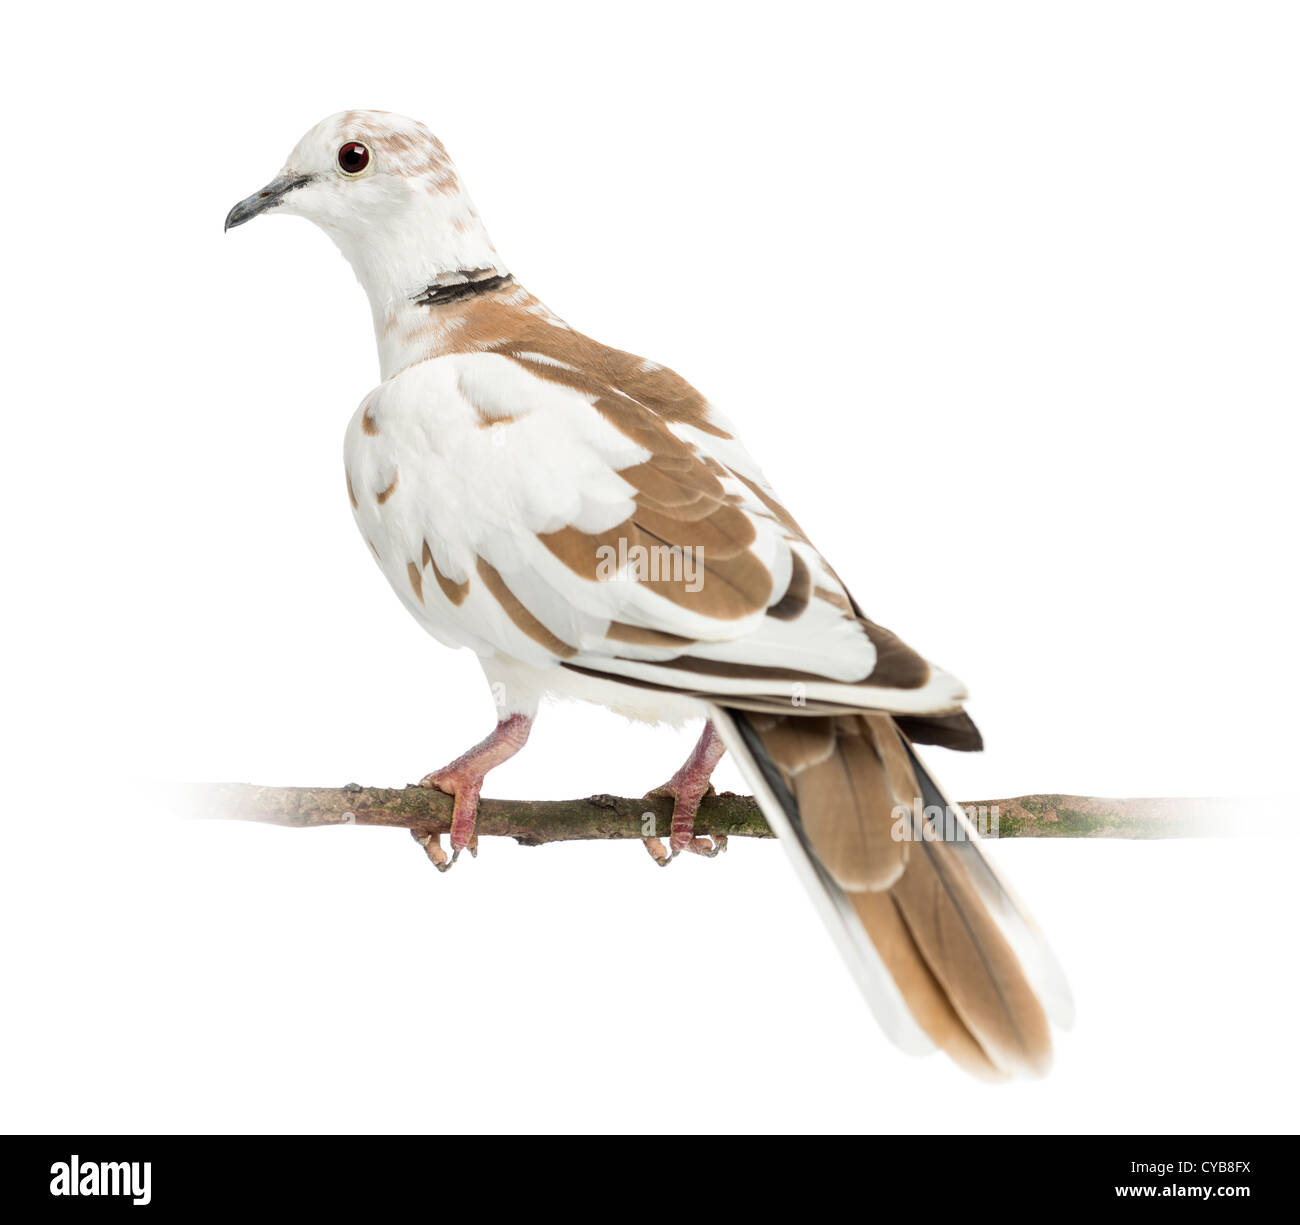 Rear view of an African Collared Dove, Streptopelia roseogrisea, perched on a branch against white background Stock Photo